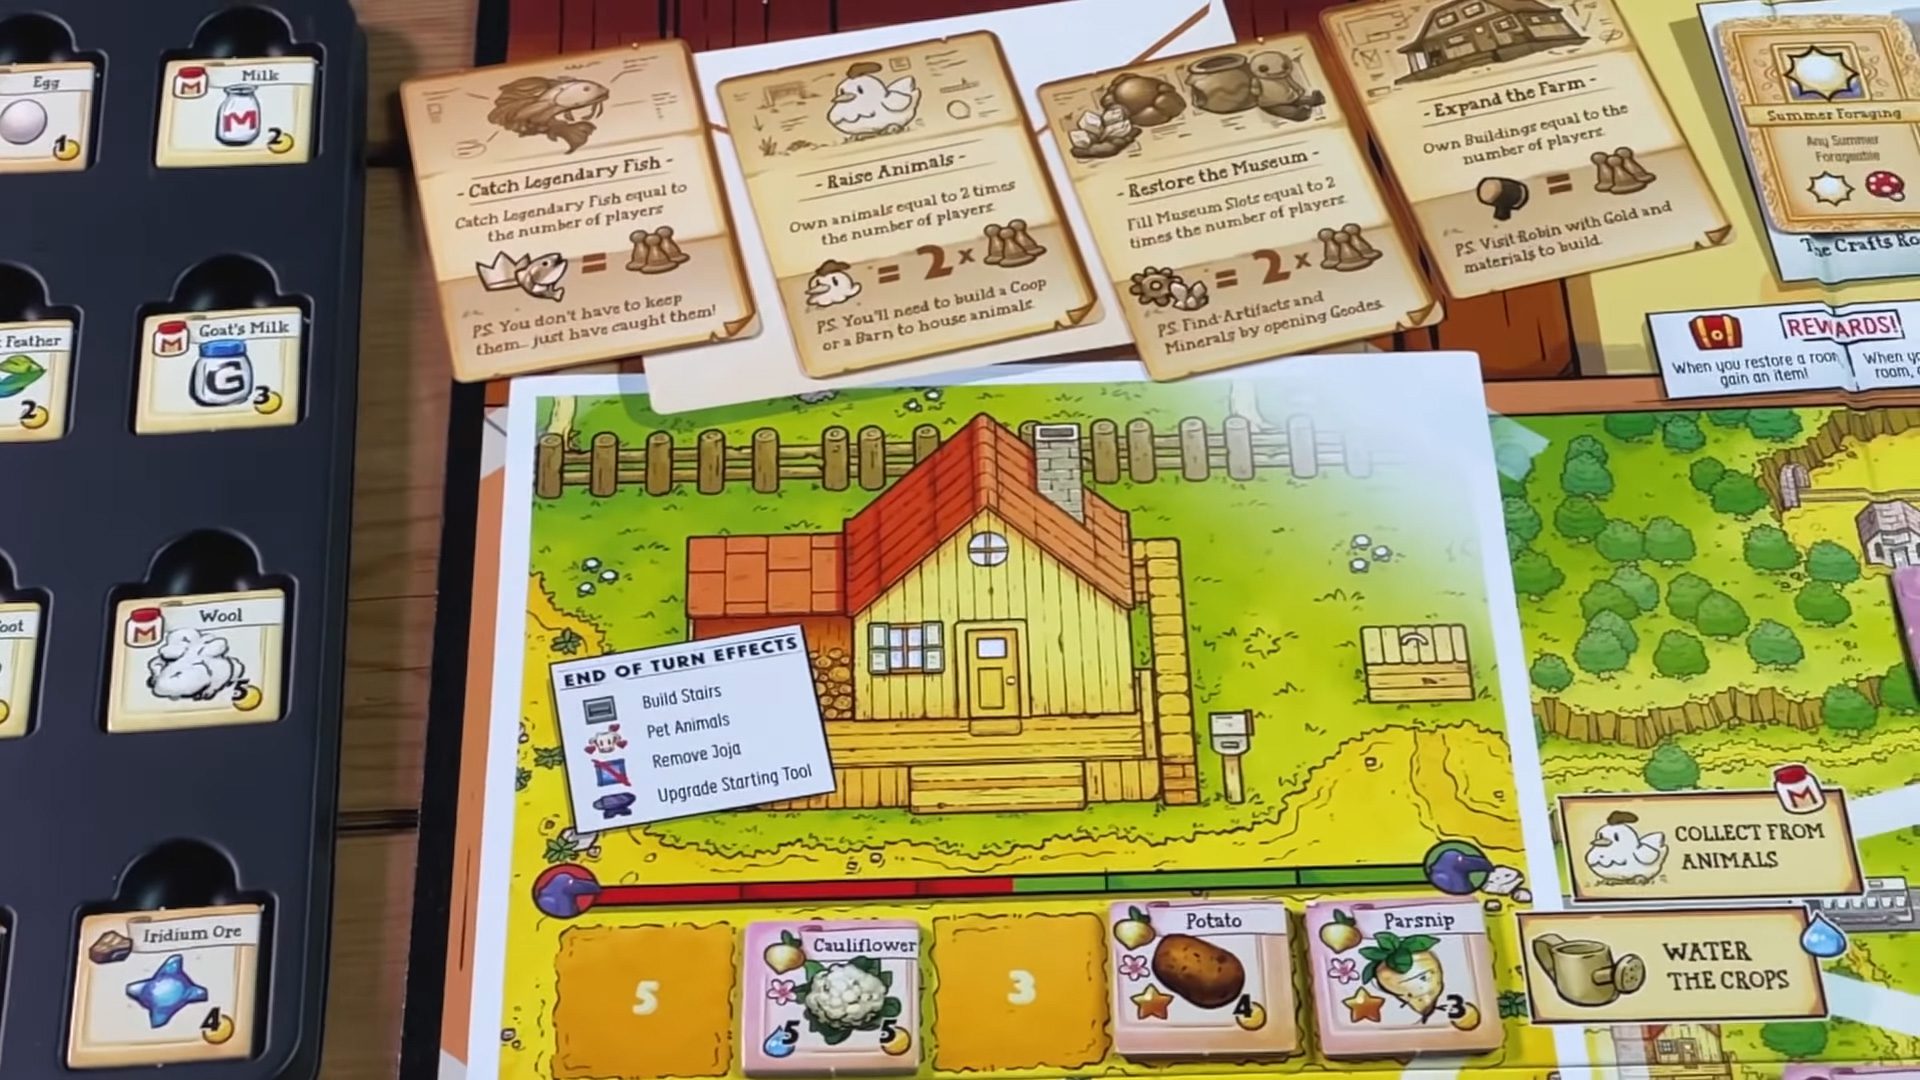 They condensed Pelican Town into a board game.